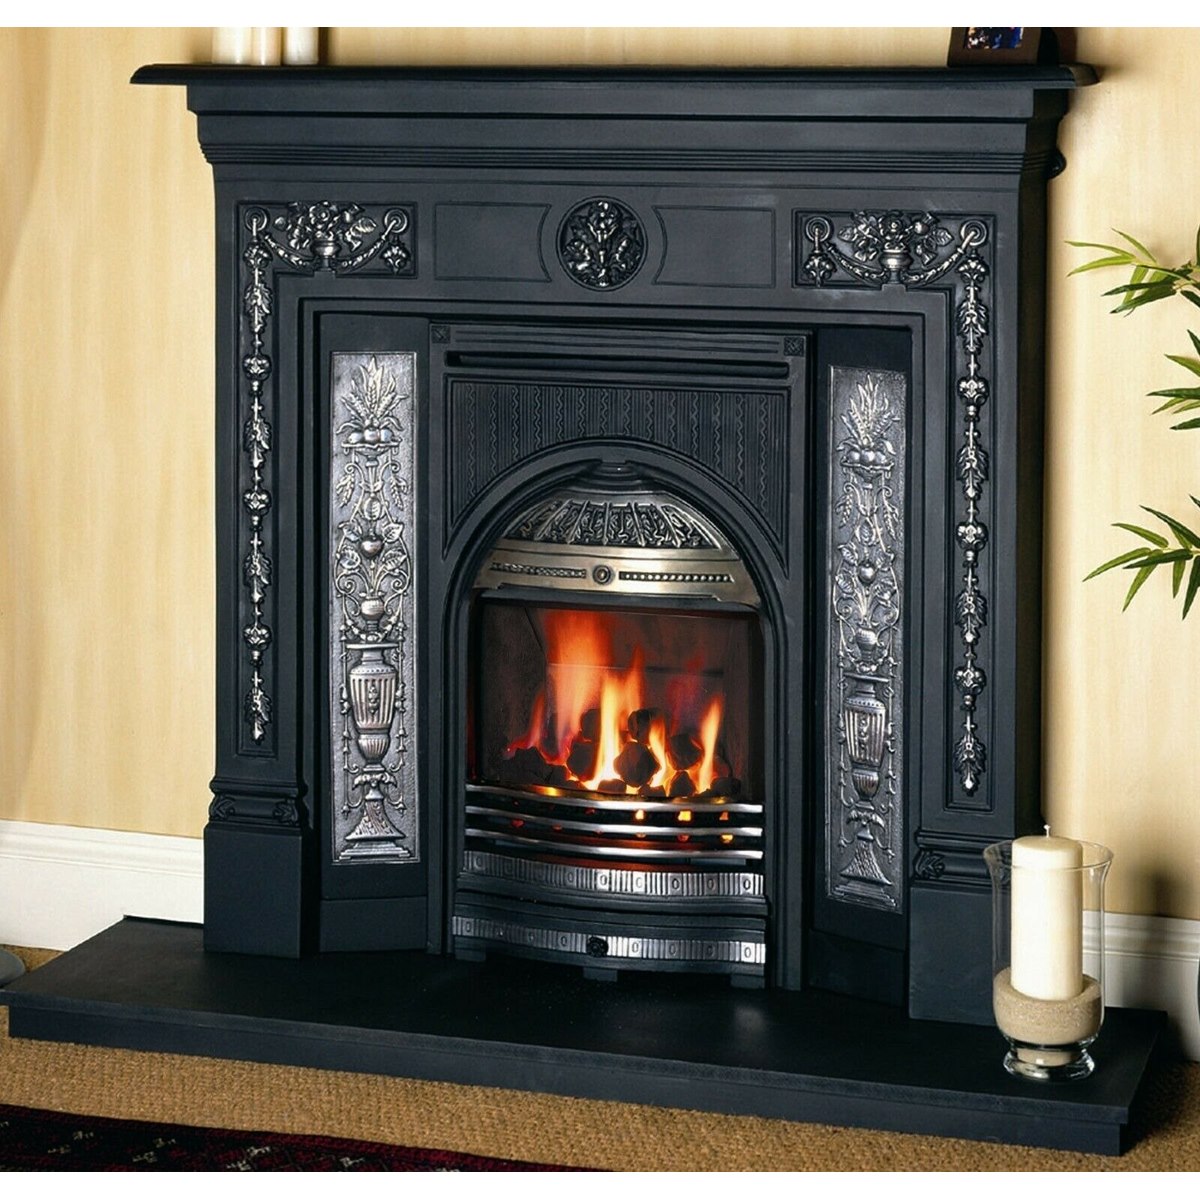 How to Restore Cast Iron Fireplaces